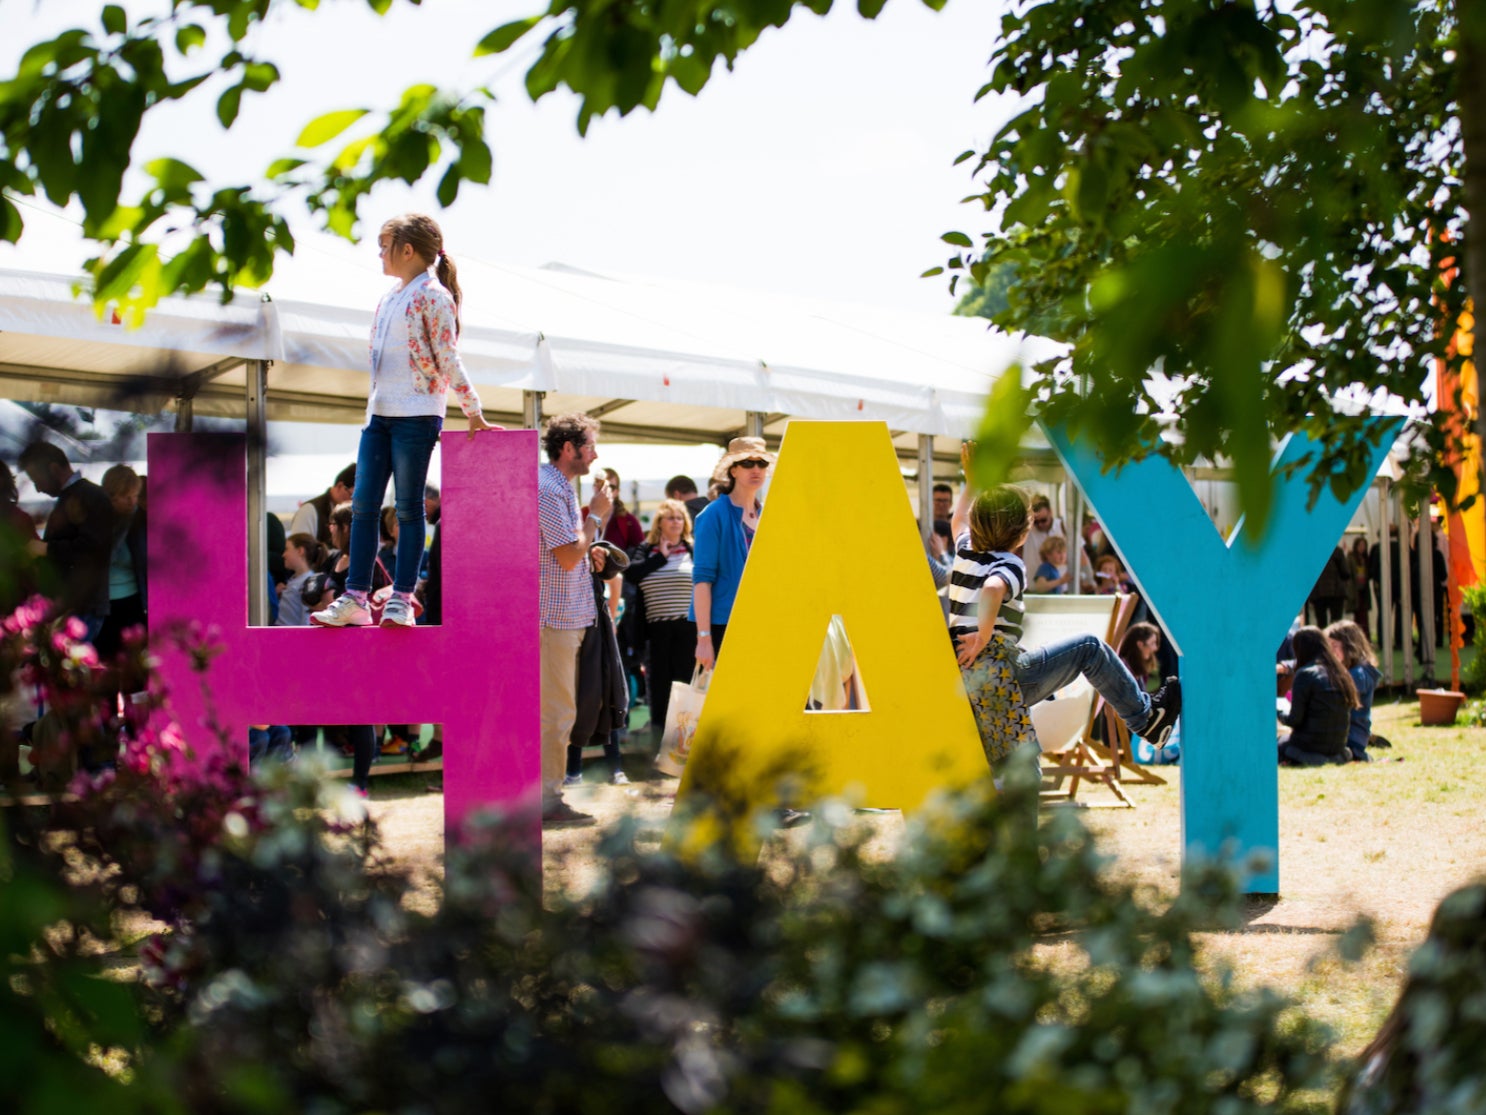 ‘The Independent’ is partnering with Hay Festival for a new panel series